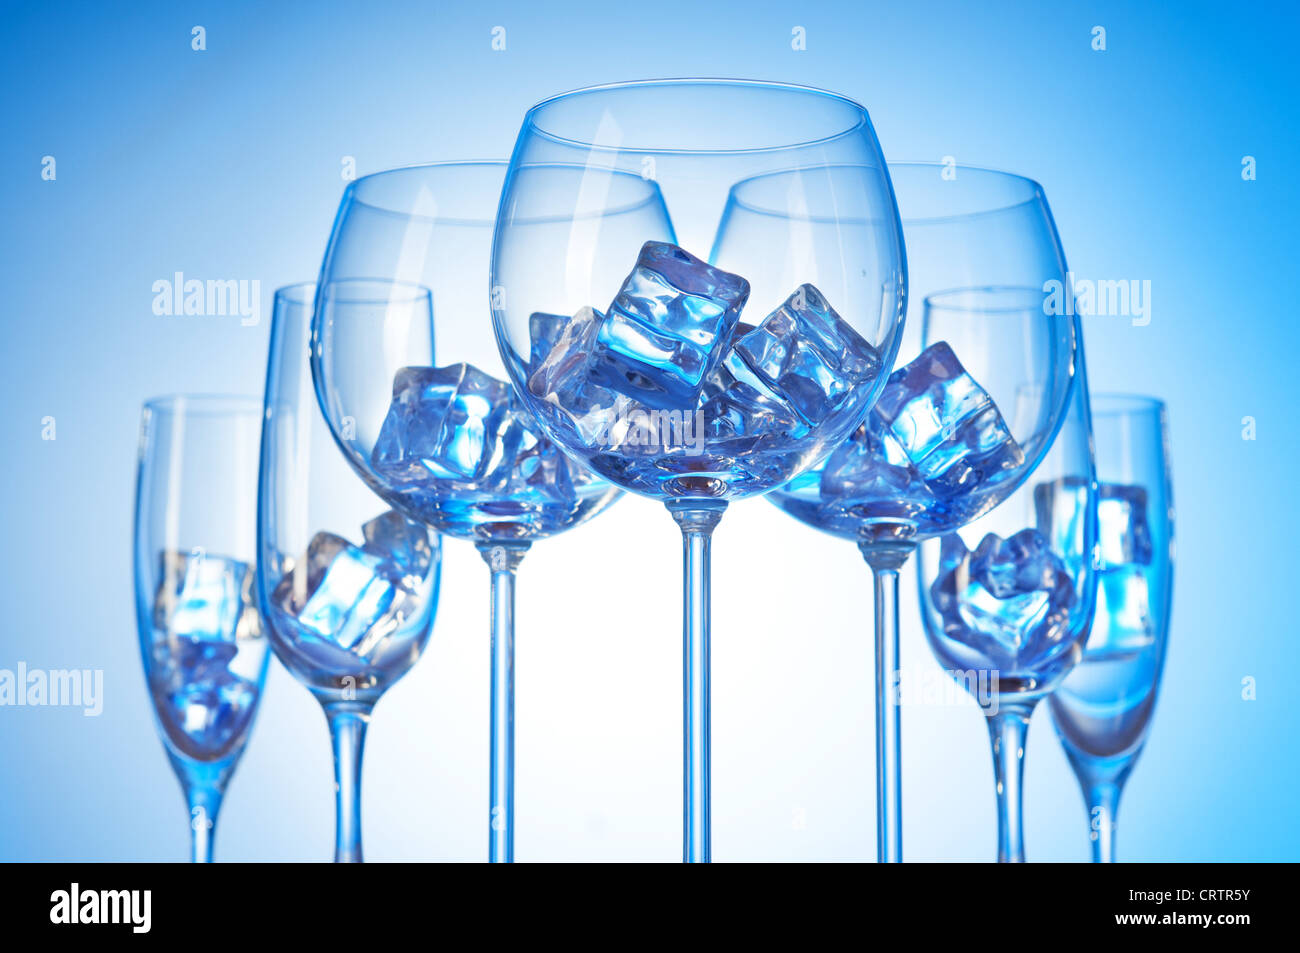 Glasses of water against gradient background Stock Photo